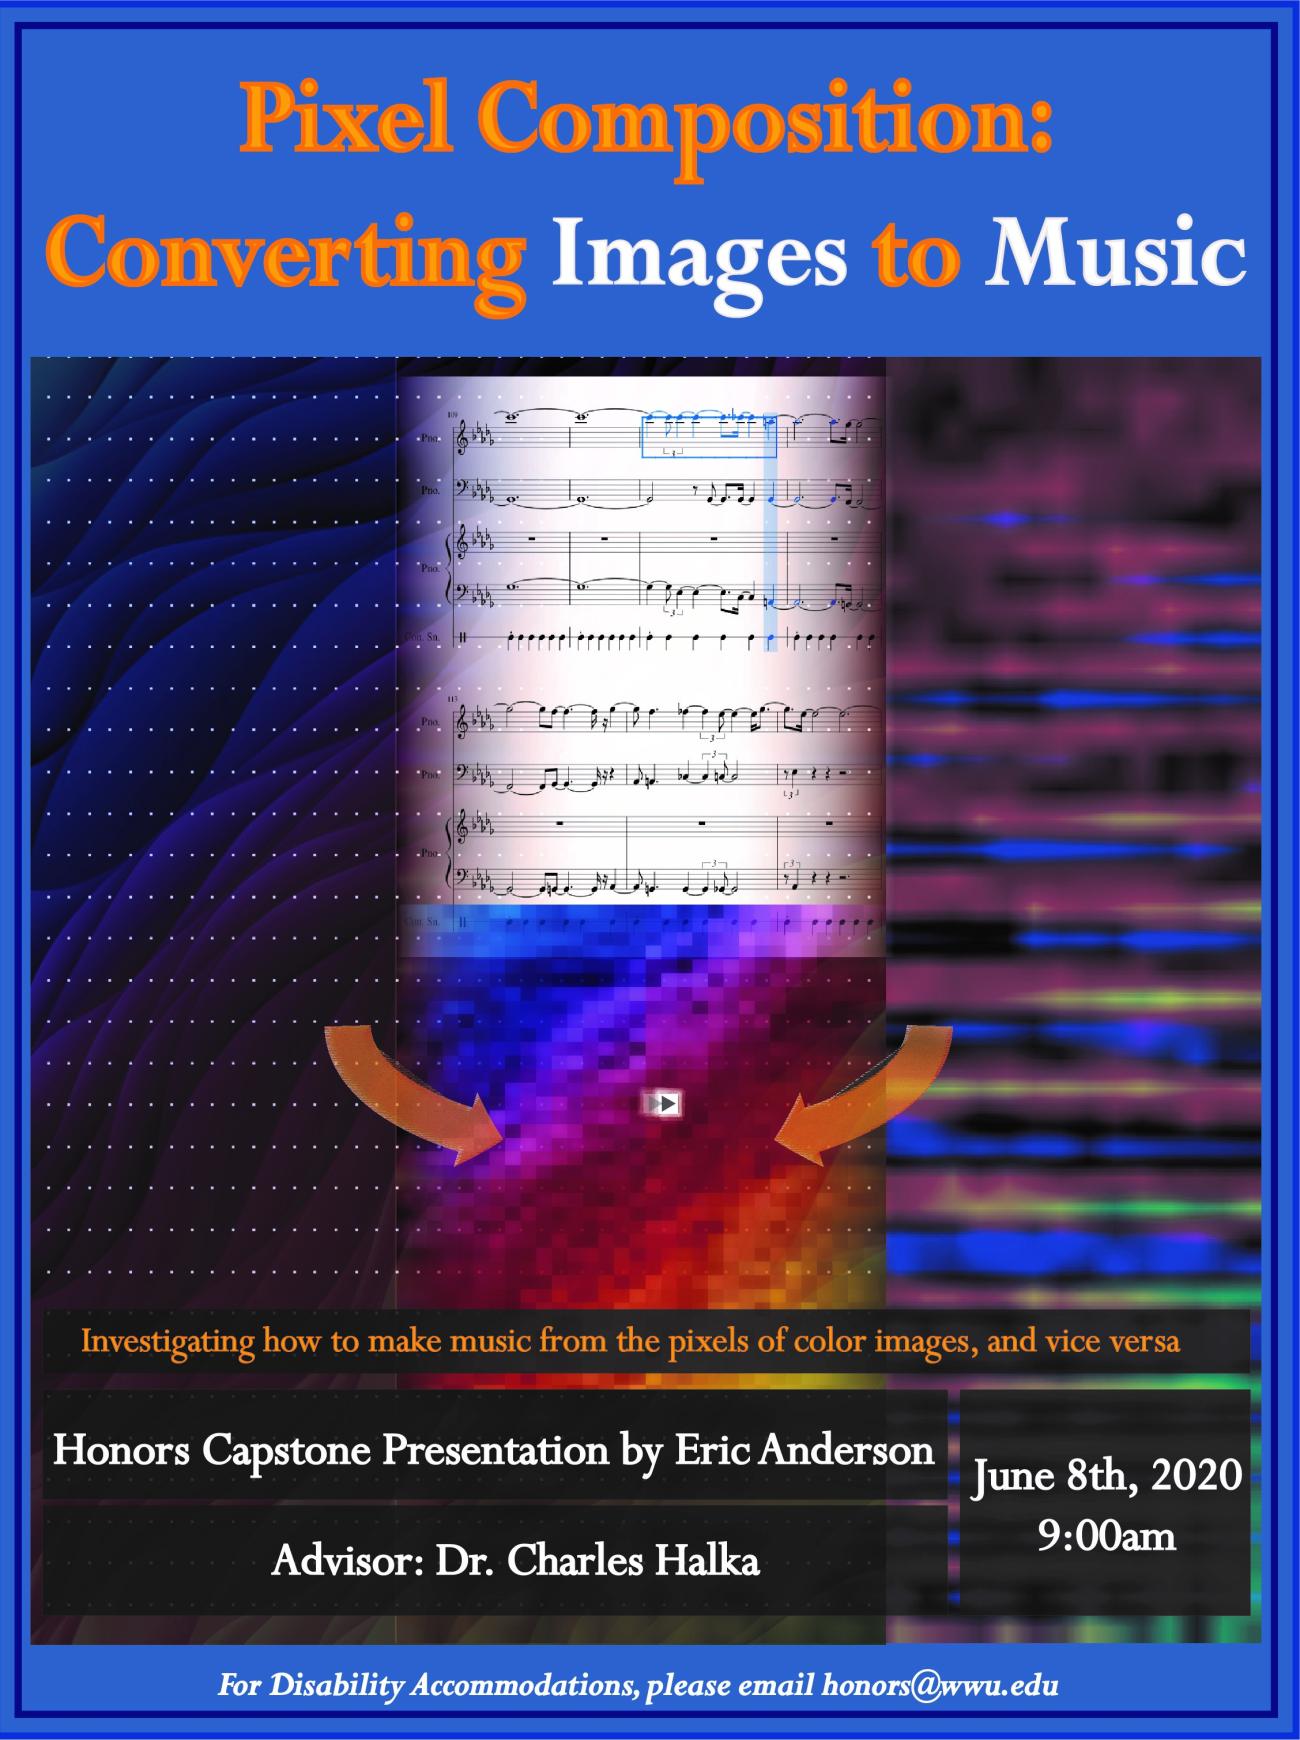 Image: Several colorful images fused together, along with sheet music and arrows pointing towards a central pixelated color image.  Text: "Investigating how to make music from the pixels of color images, and vice versa"  "Honors Capstone Presentation by Eric Anderson"  "Advisor: Dr. Charles Halka"  "June 8th, 2020"  "For Disability Accommodations, please email honors@wwu.edu"